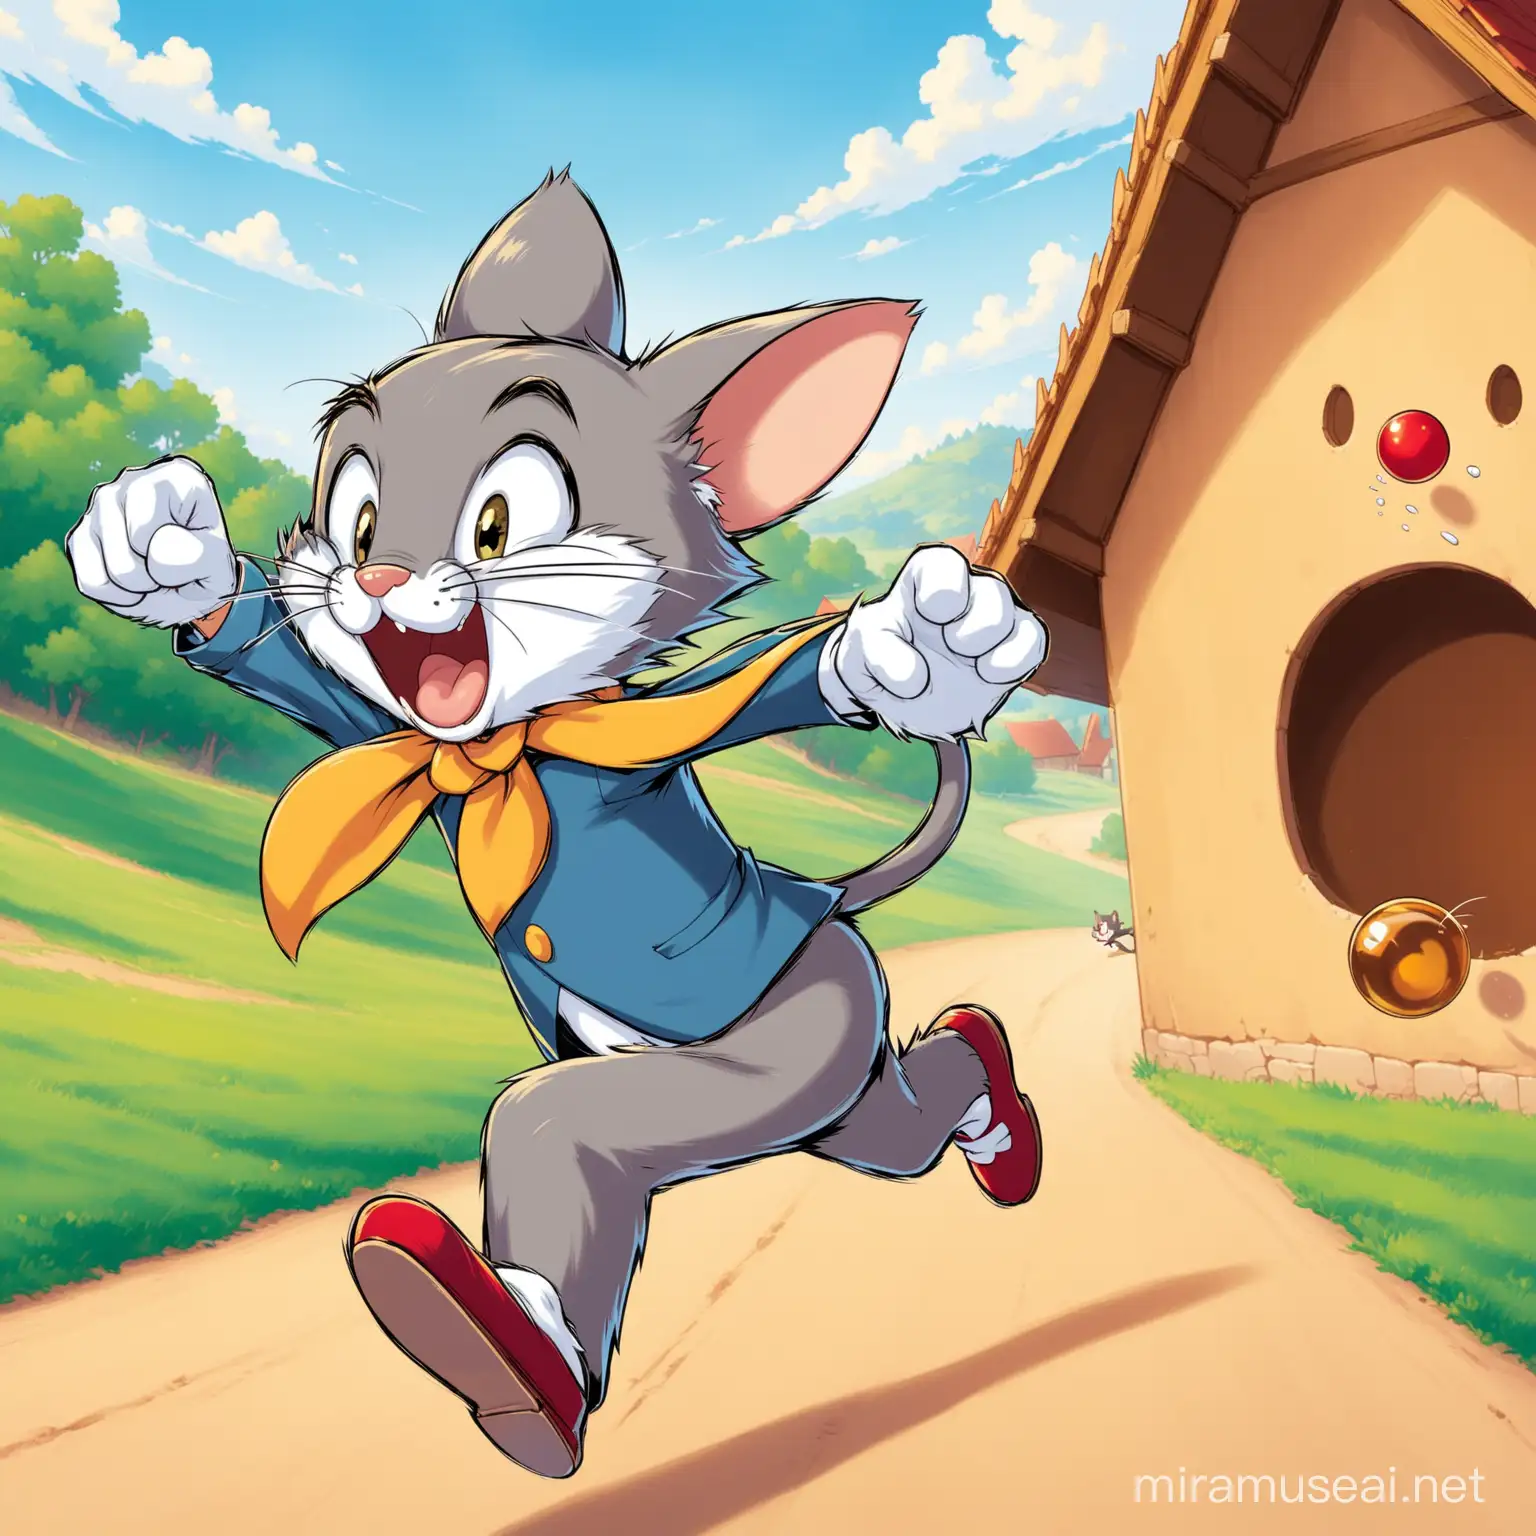 Tom chasing Jerry 